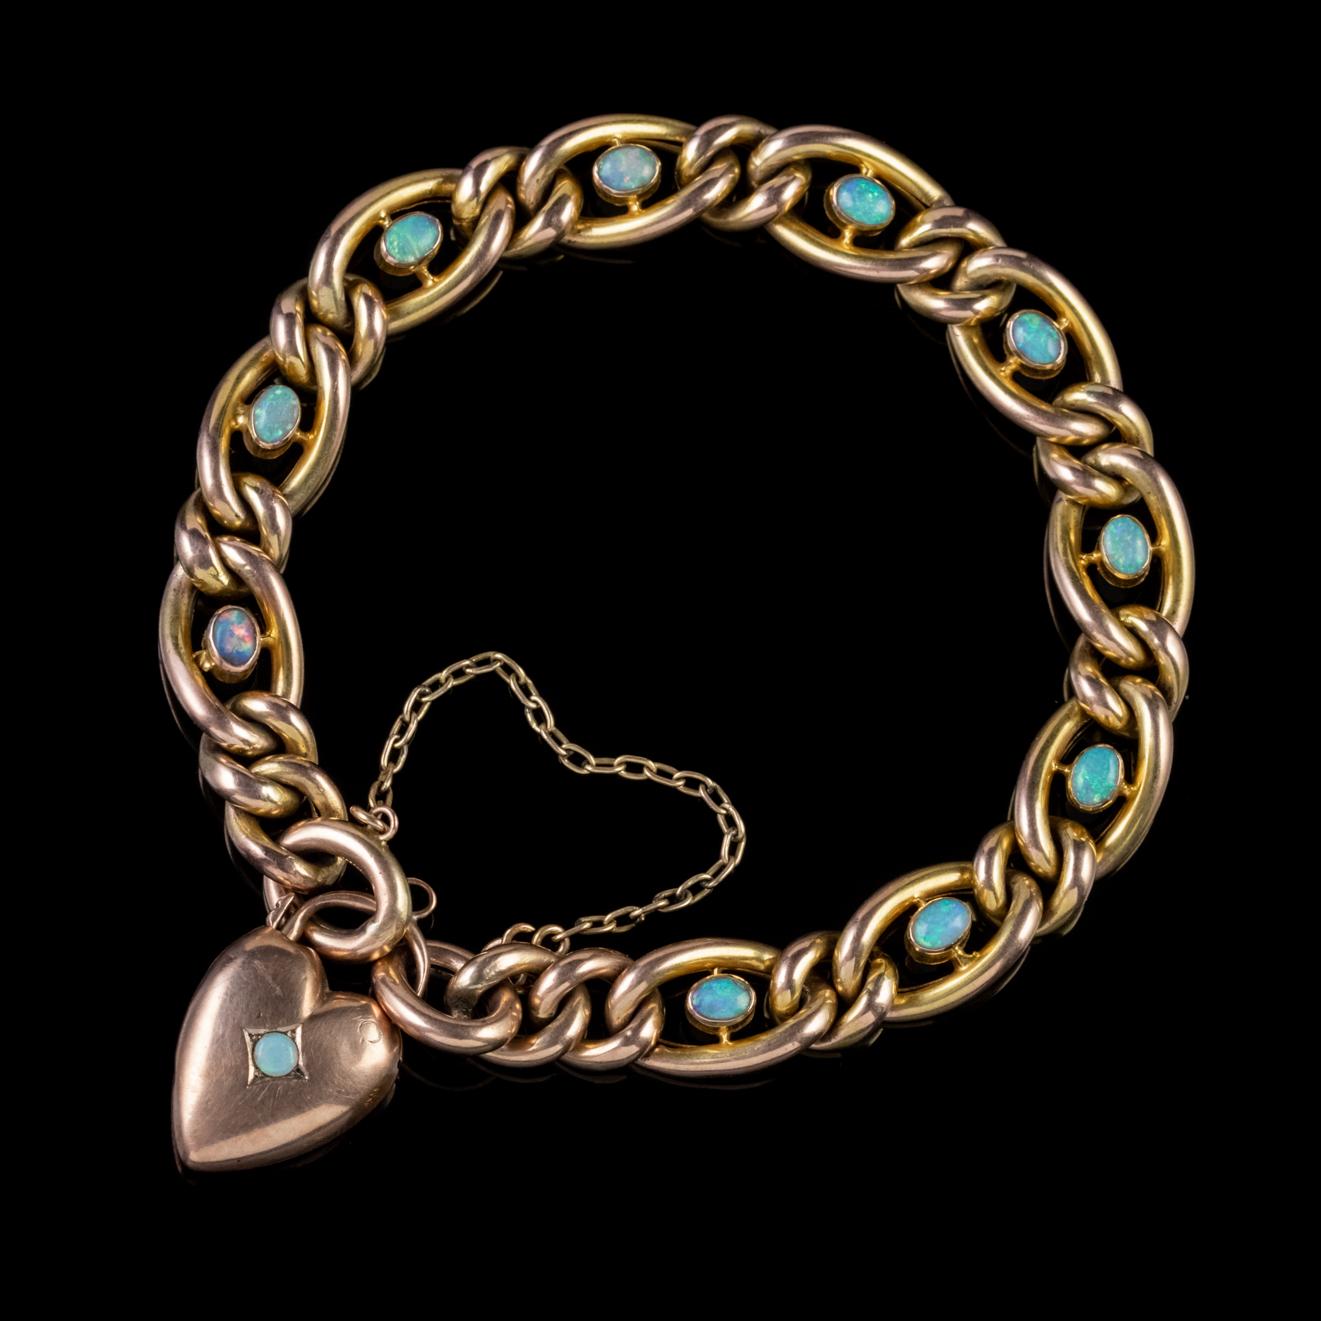 A beautiful Antique late-Victorian curb bracelet made by the Atkinson Brothers, Circa 1900. The lovely piece is fashioned in 9ct Yellow Gold and decorated with ten colourful natural Opals, approx. 0.15ct each. 

Opal is a kaleidoscope of rainbow